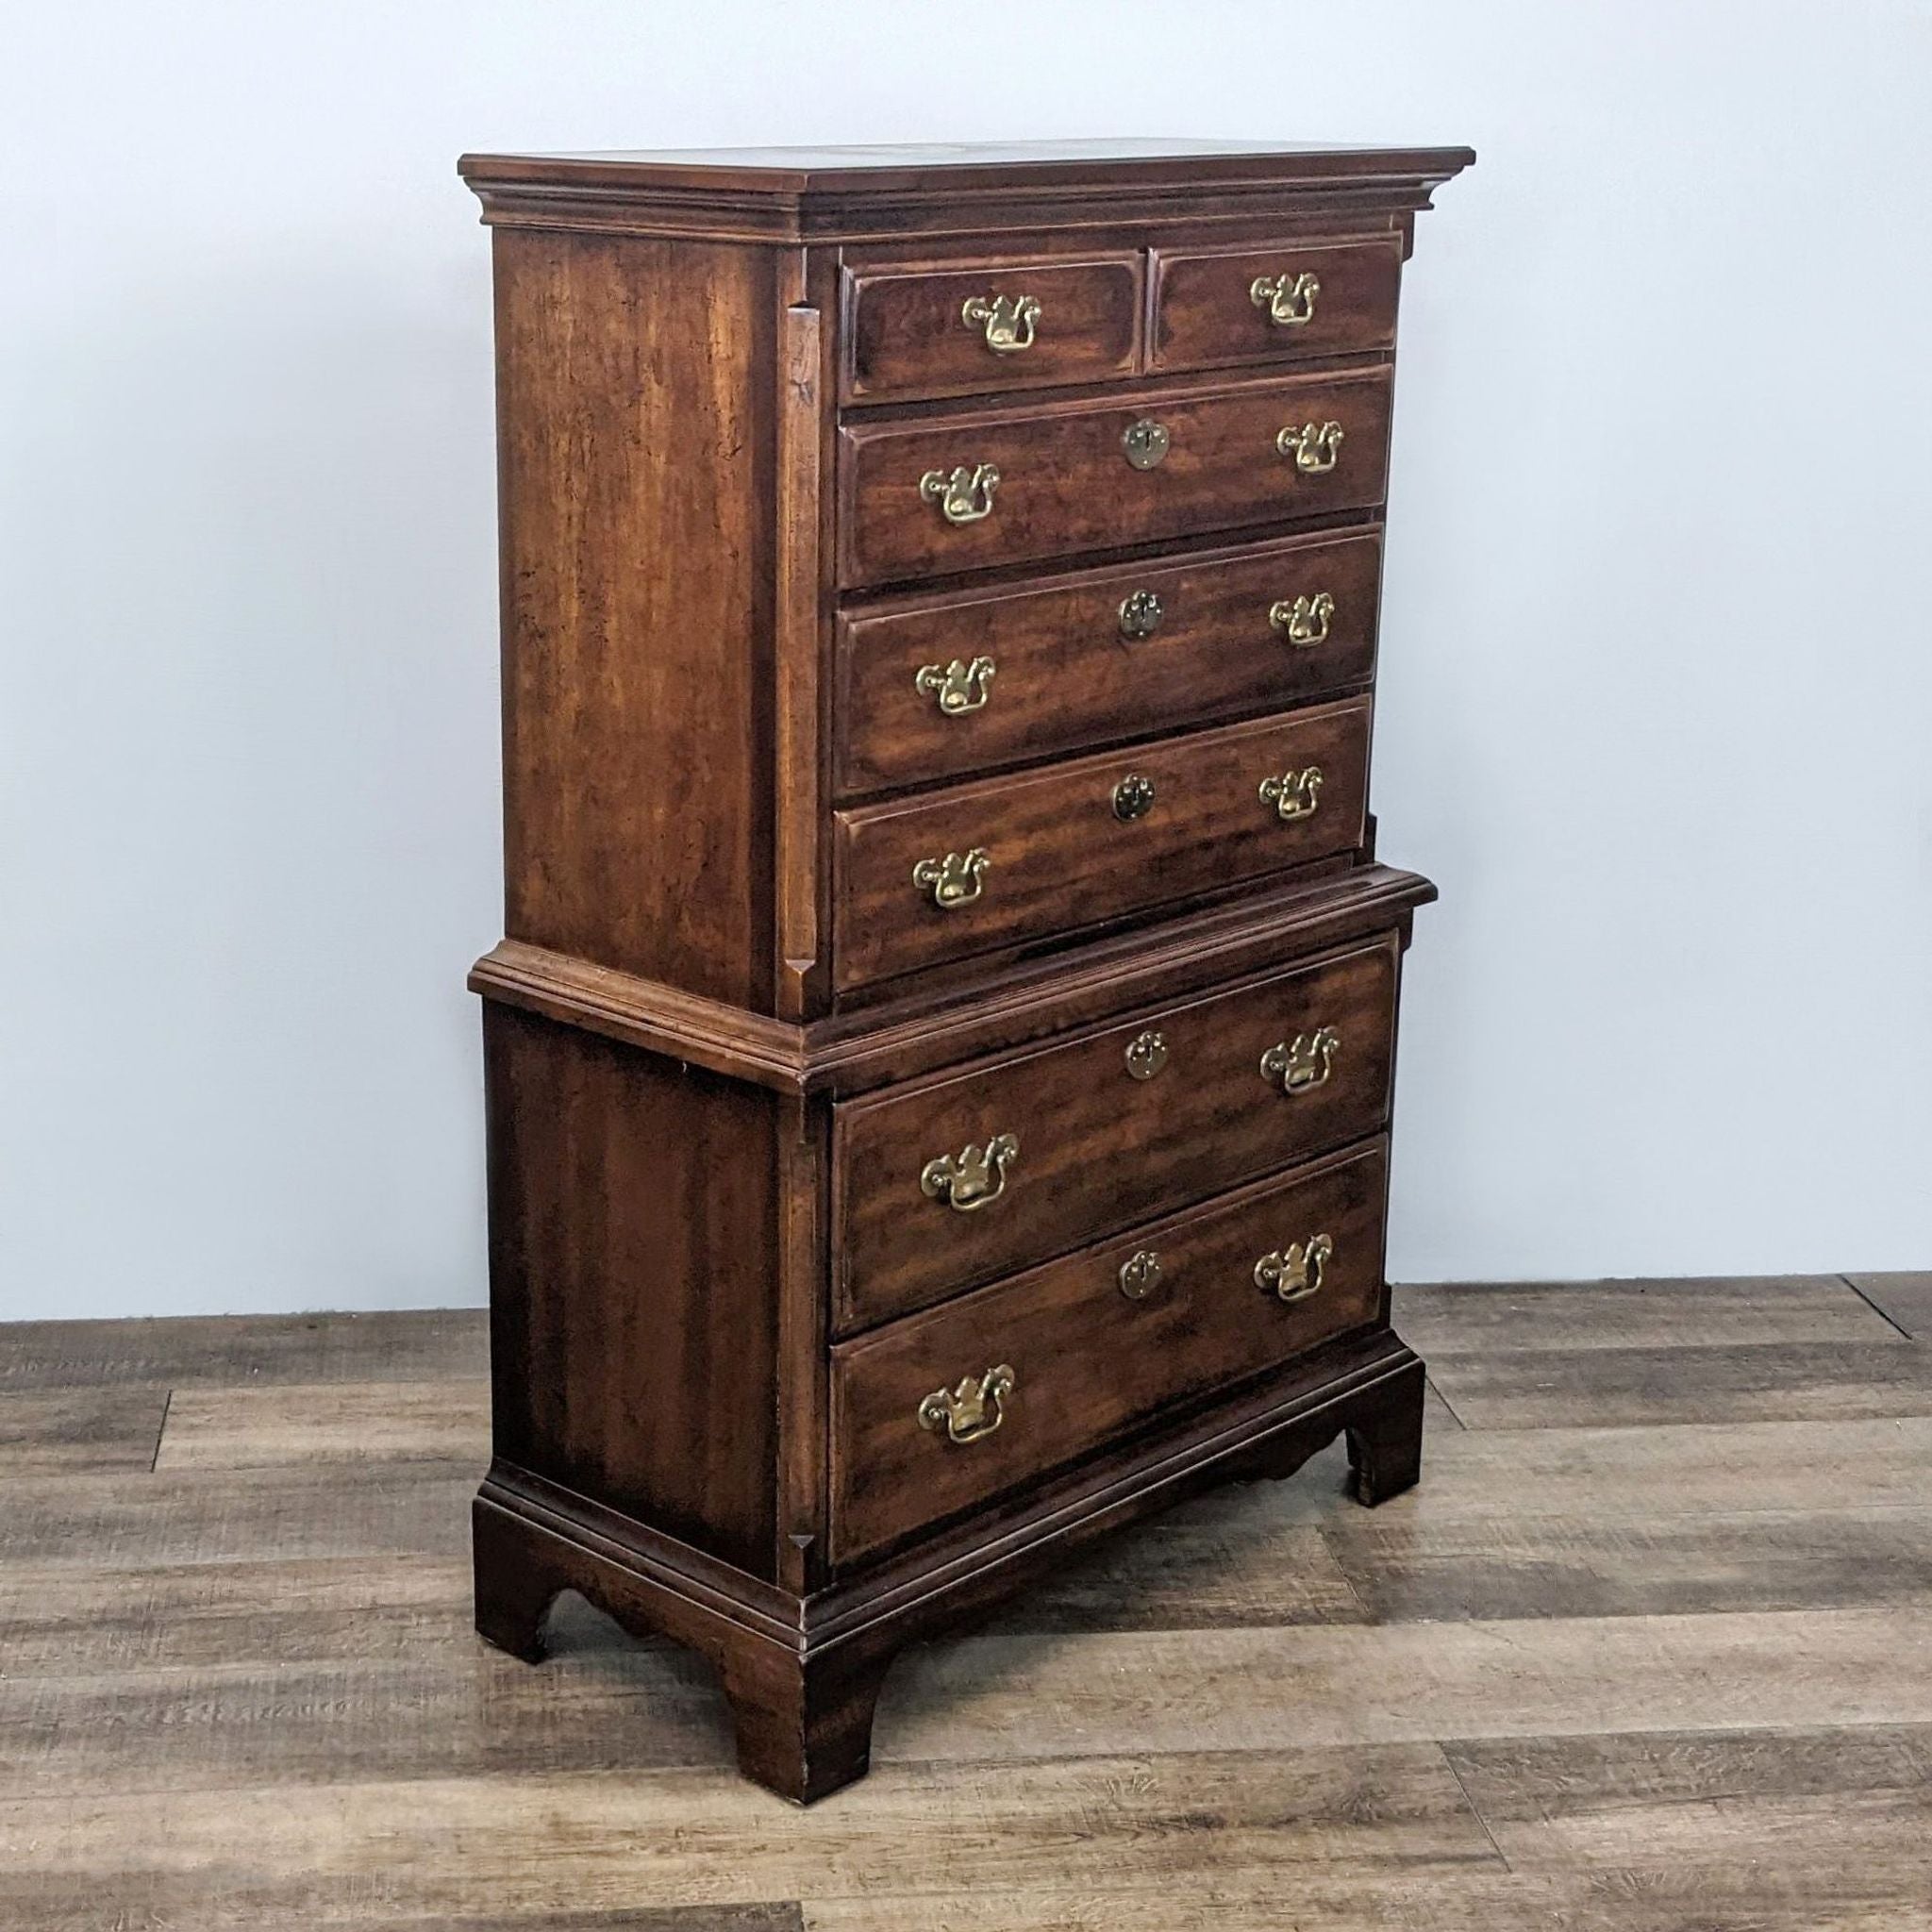 Reperch classic wooden highboy dresser with 6 drawers and antique brass pulls on grey background.